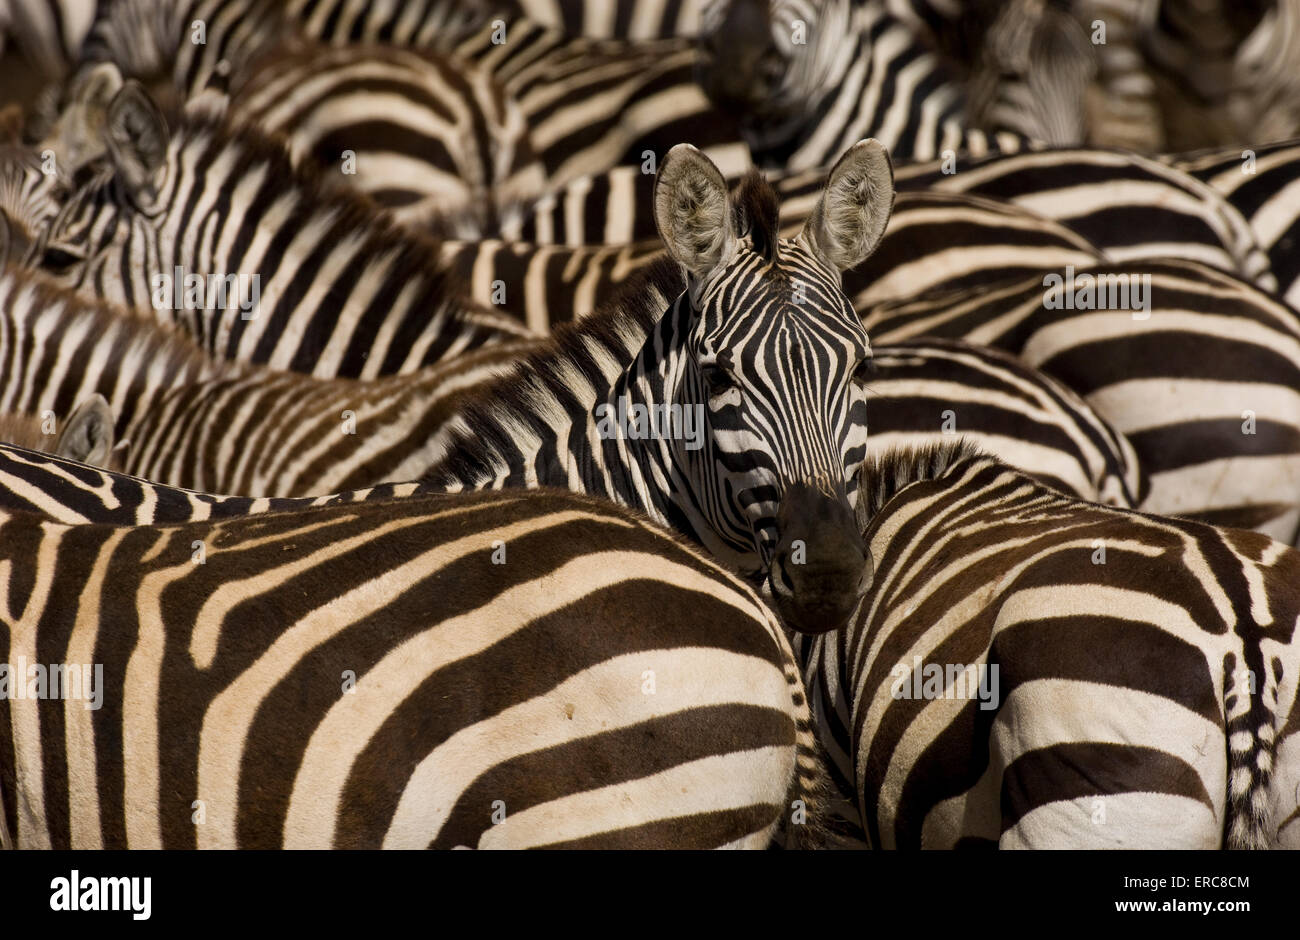 BURCHELL'S ZEBRAS CROWDED TOGETHER IN WATERHOLE ONE LOOKING AT CAMERA Stock Photo